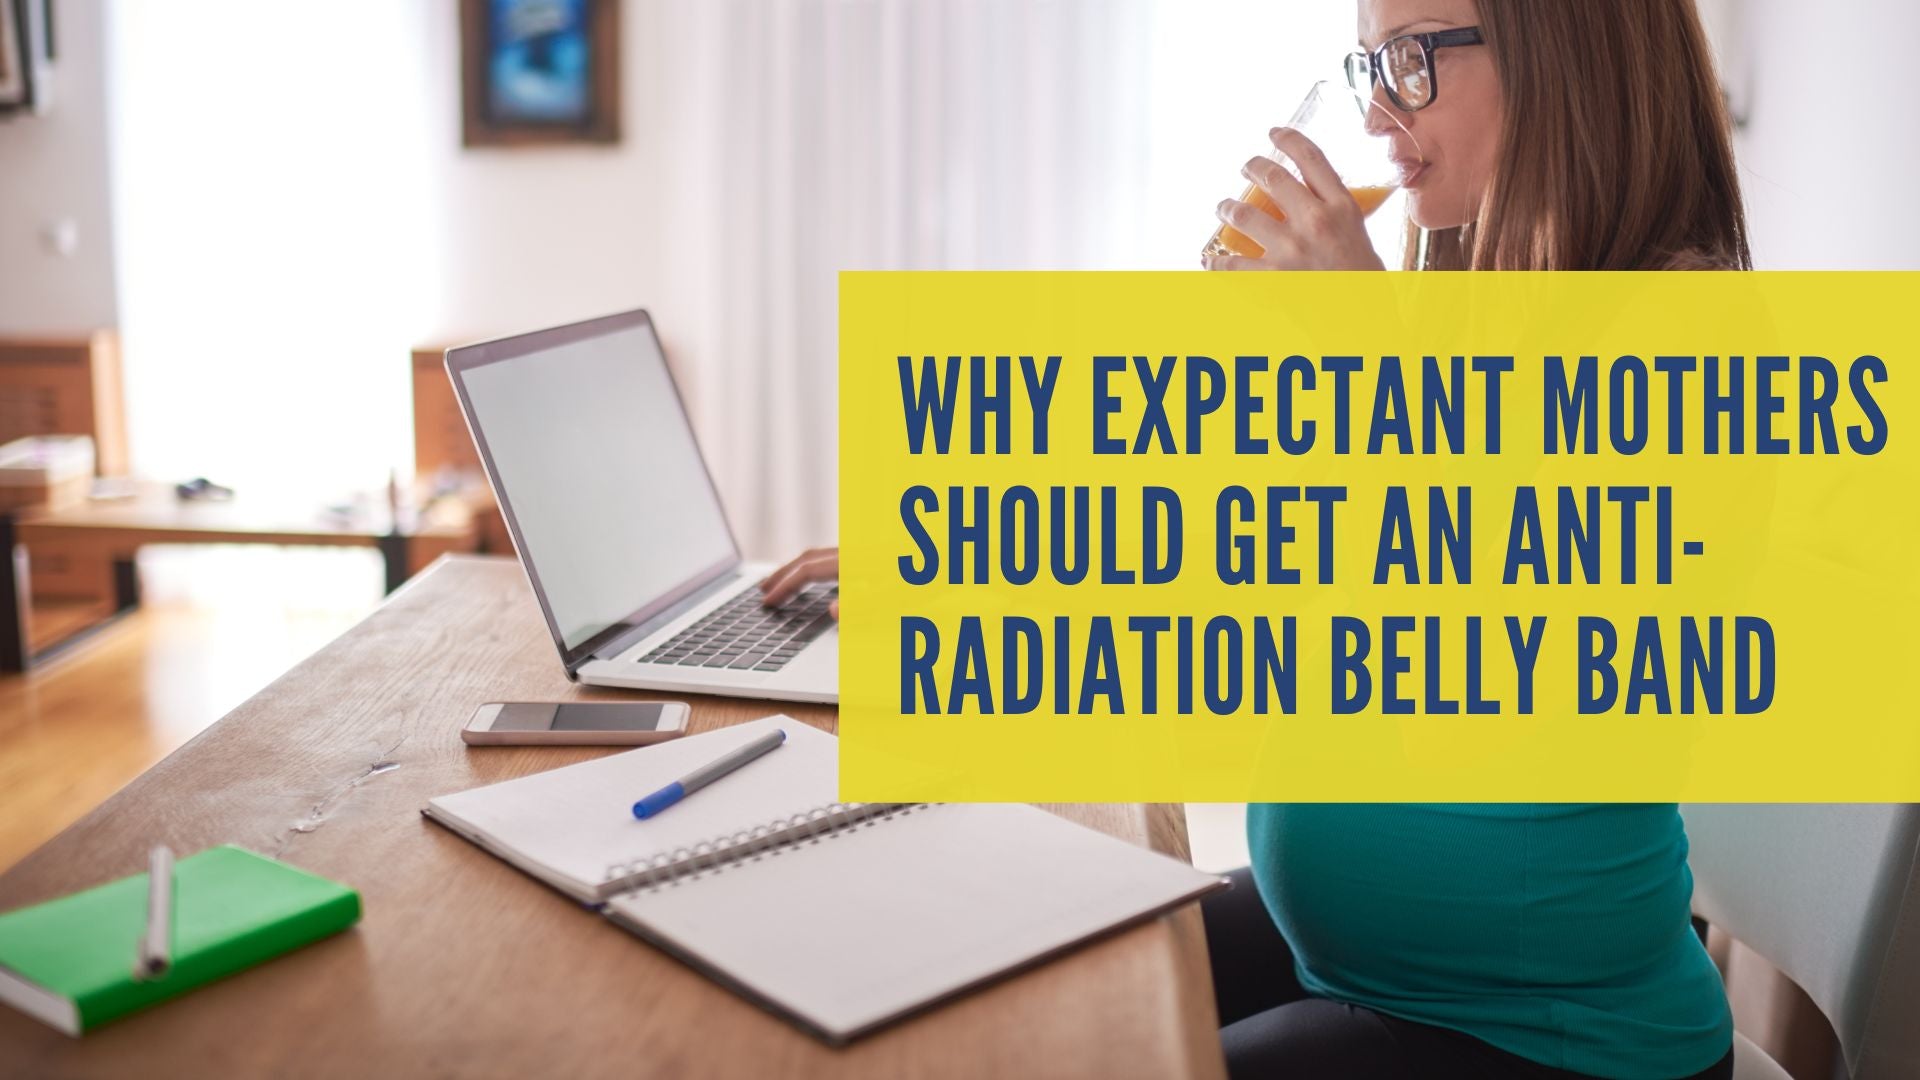 Why Expectant Mothers Should Get An Anti-Radiation Belly Band